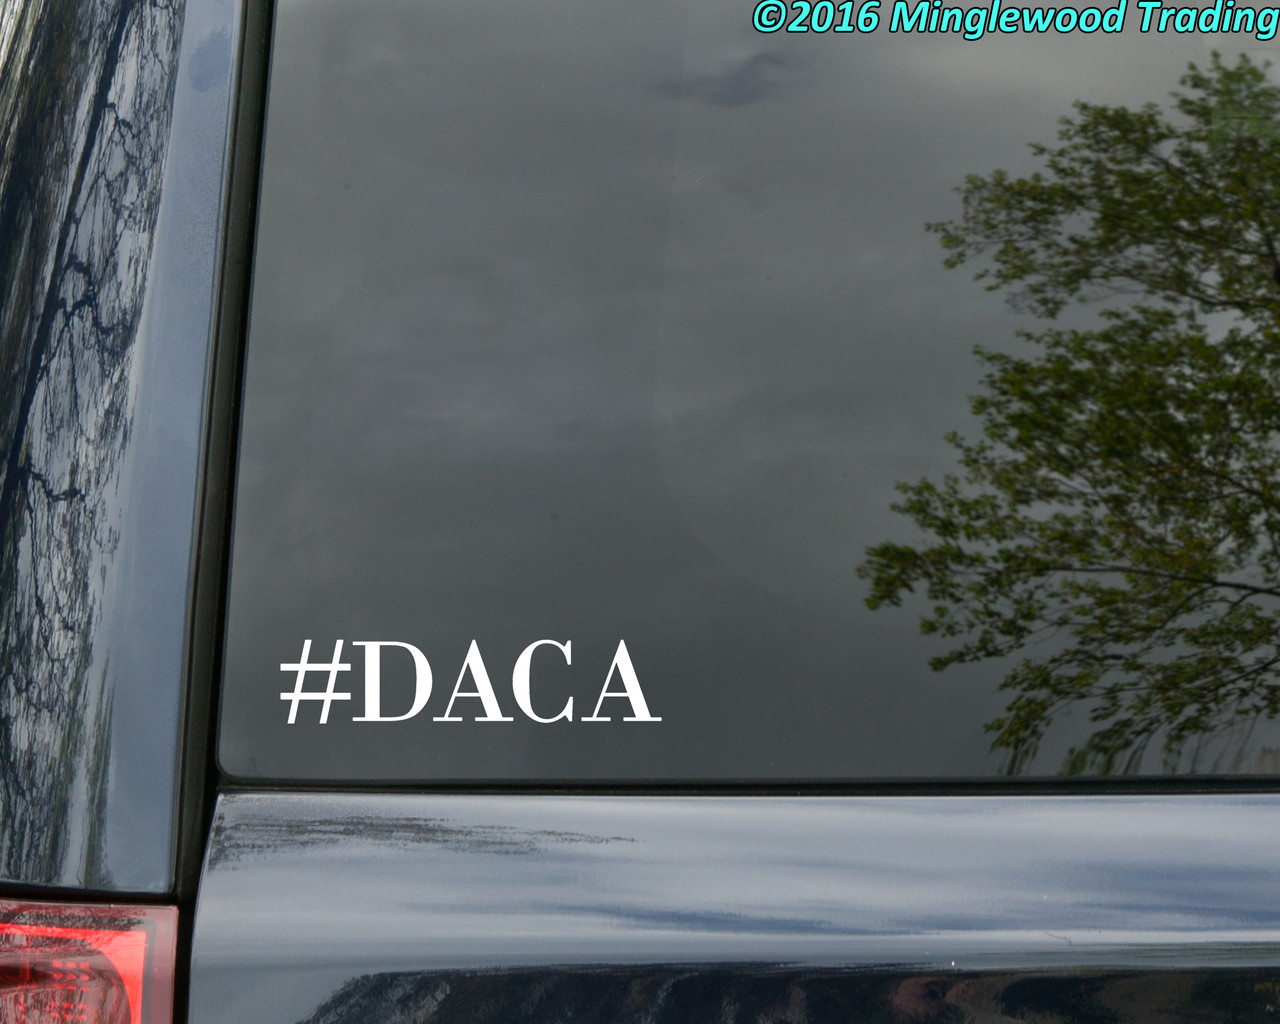 #DACA 5" x 1" WHITE Vinyl Decal Sticker - Deferred Action for Childhood Arrivals - Dreamers